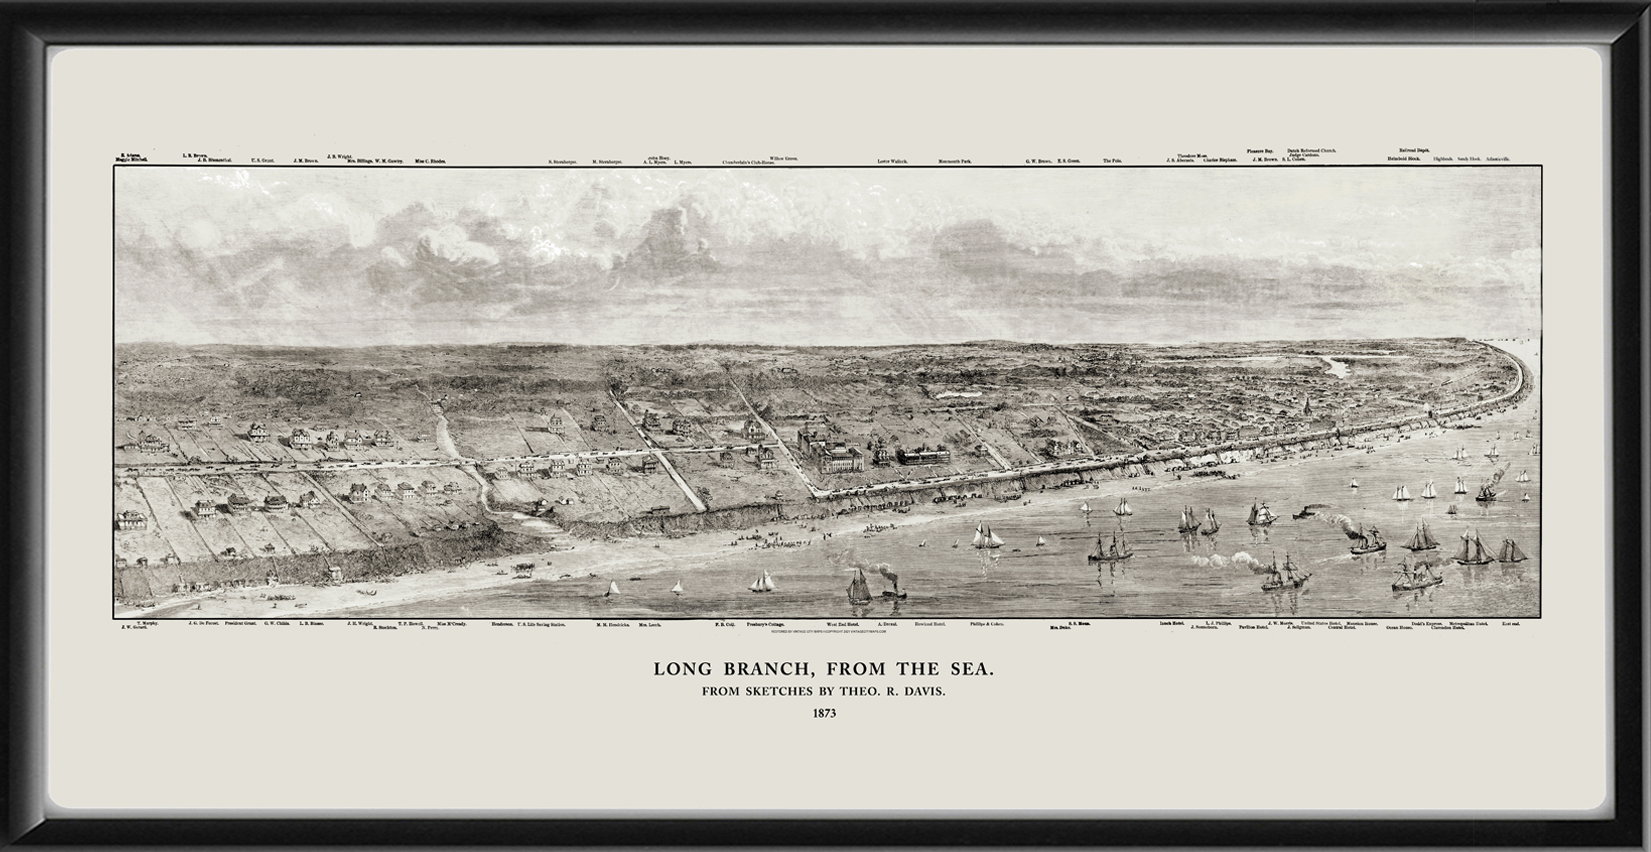 Long Branch United States Hotel - , New Jersey 1861 Old Town Map